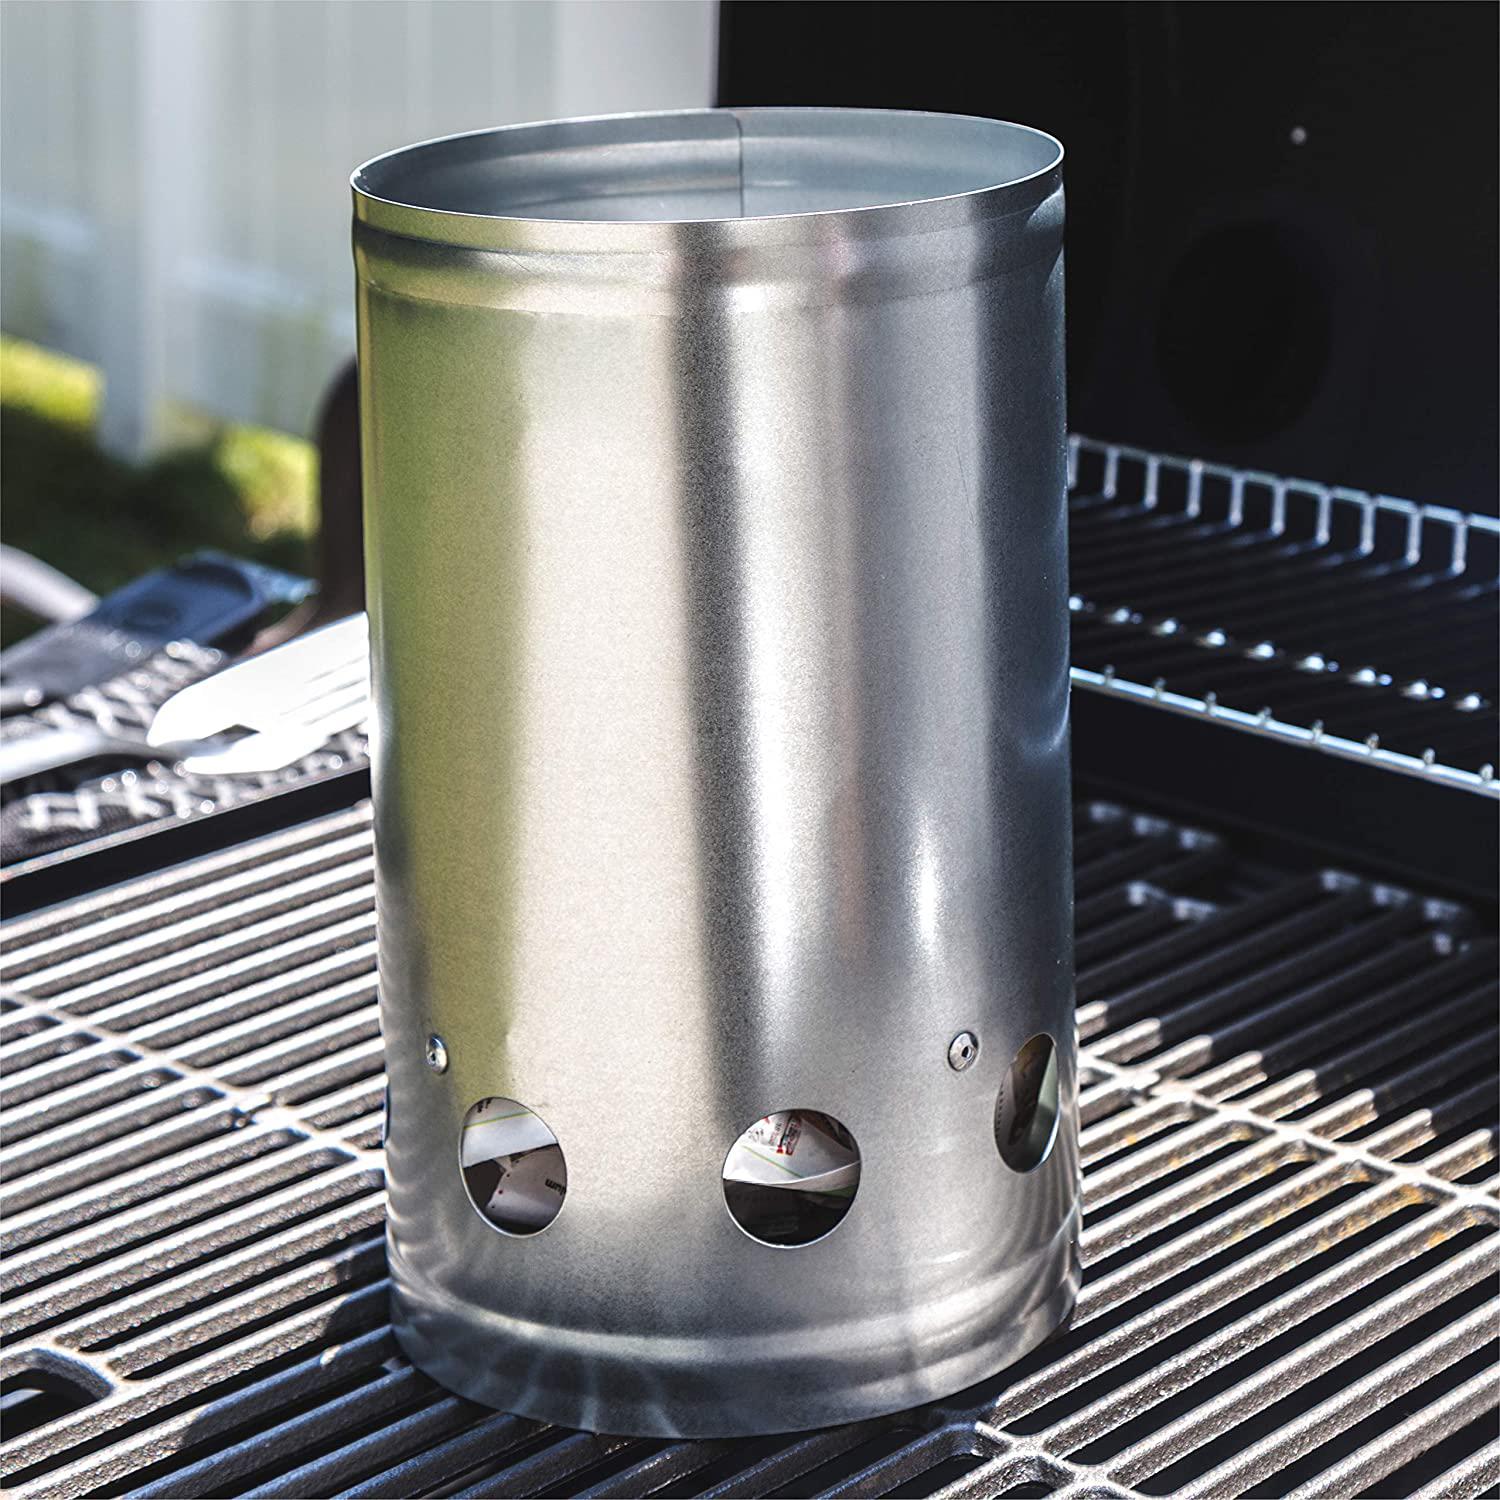 BBQ Charcoal Metal Chimney Starter by Geezy - UKBuyZone